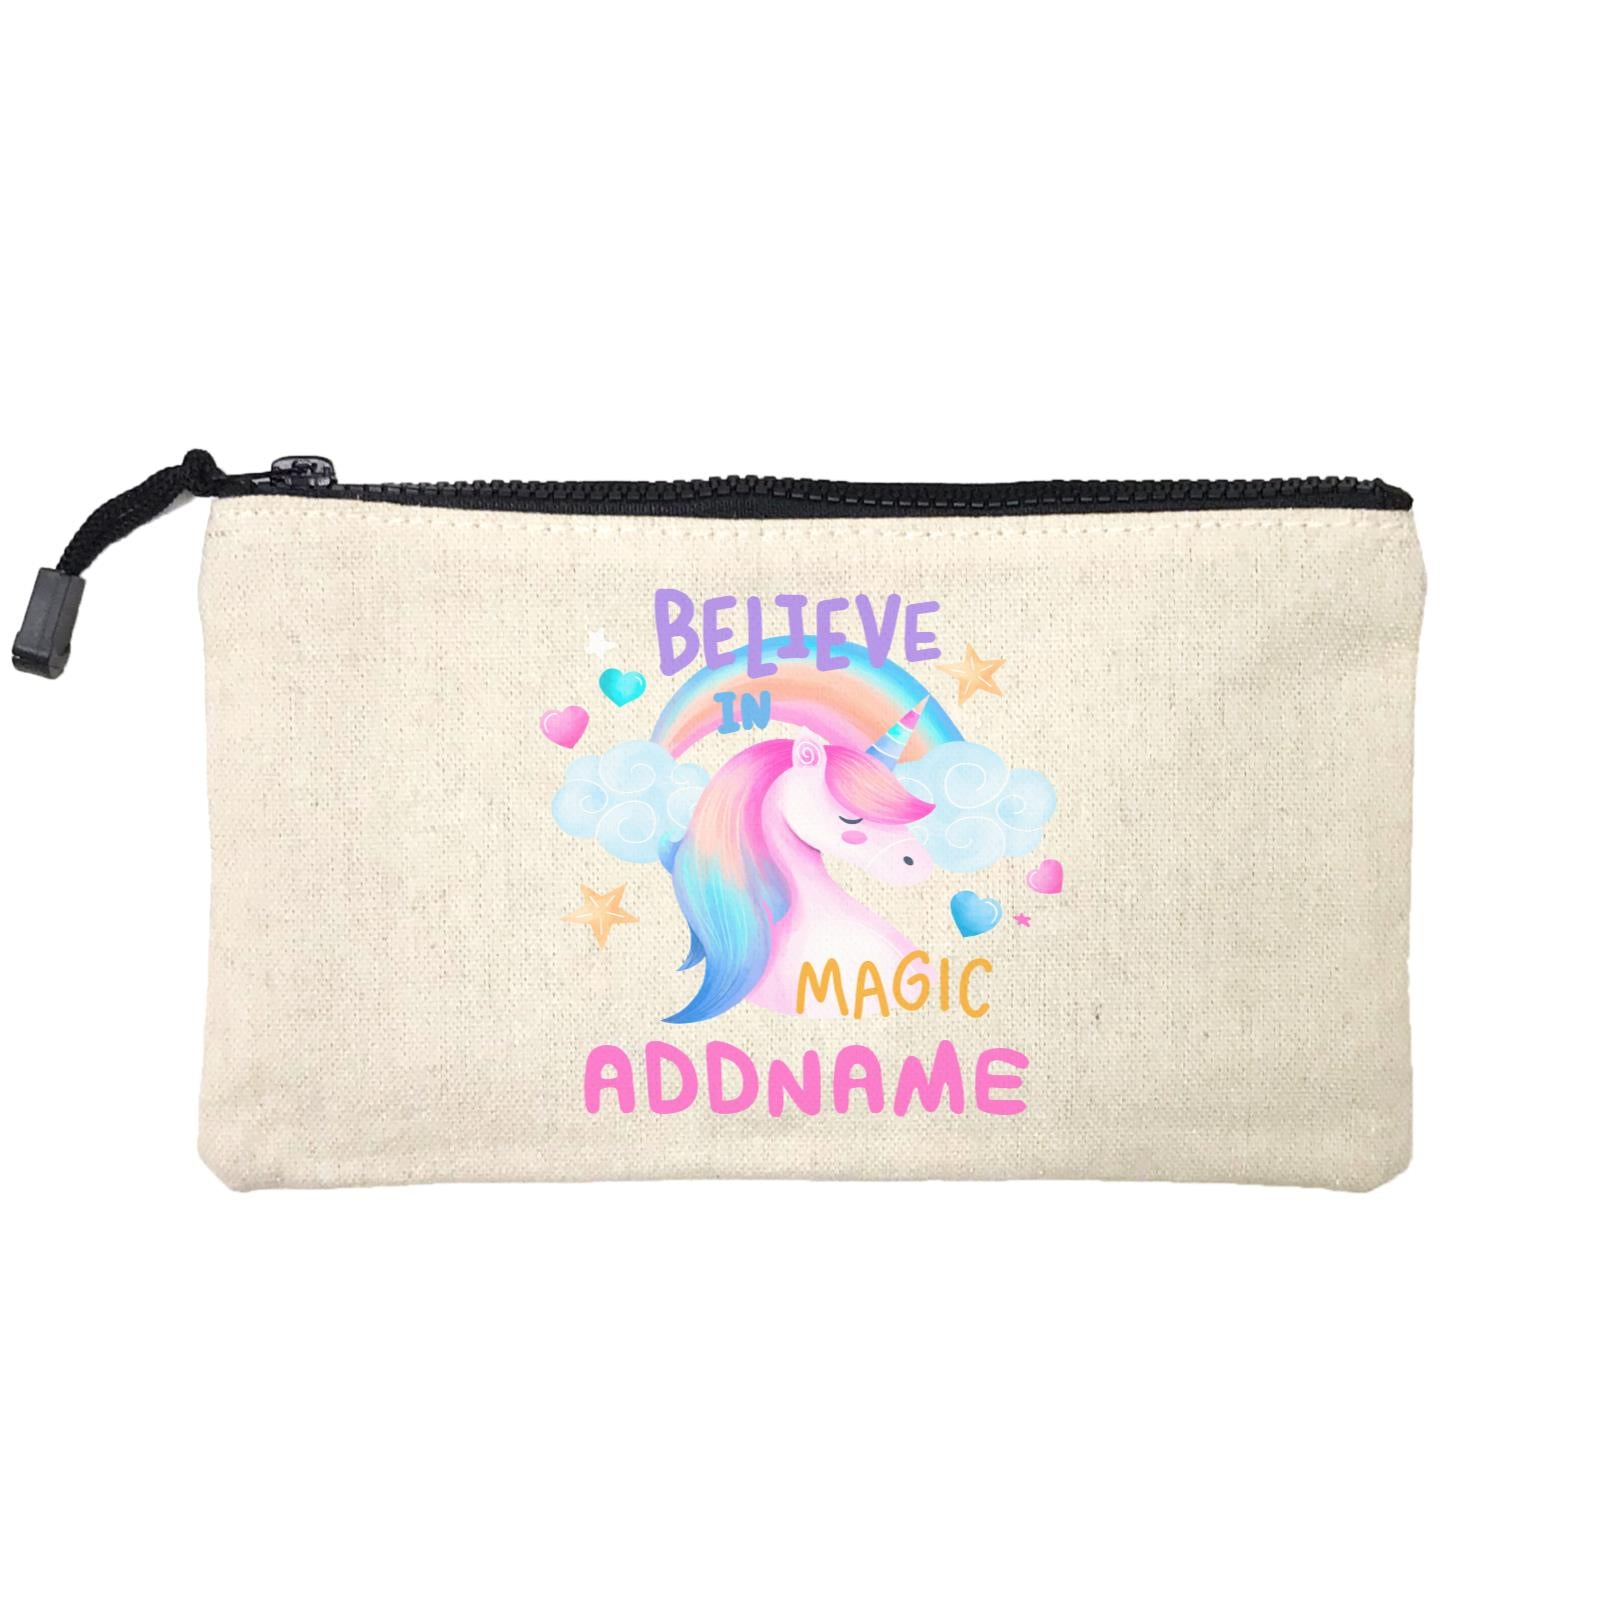 Children's Day Gift Series Believe In Magic Unicorn Addname SP Stationery Pouch